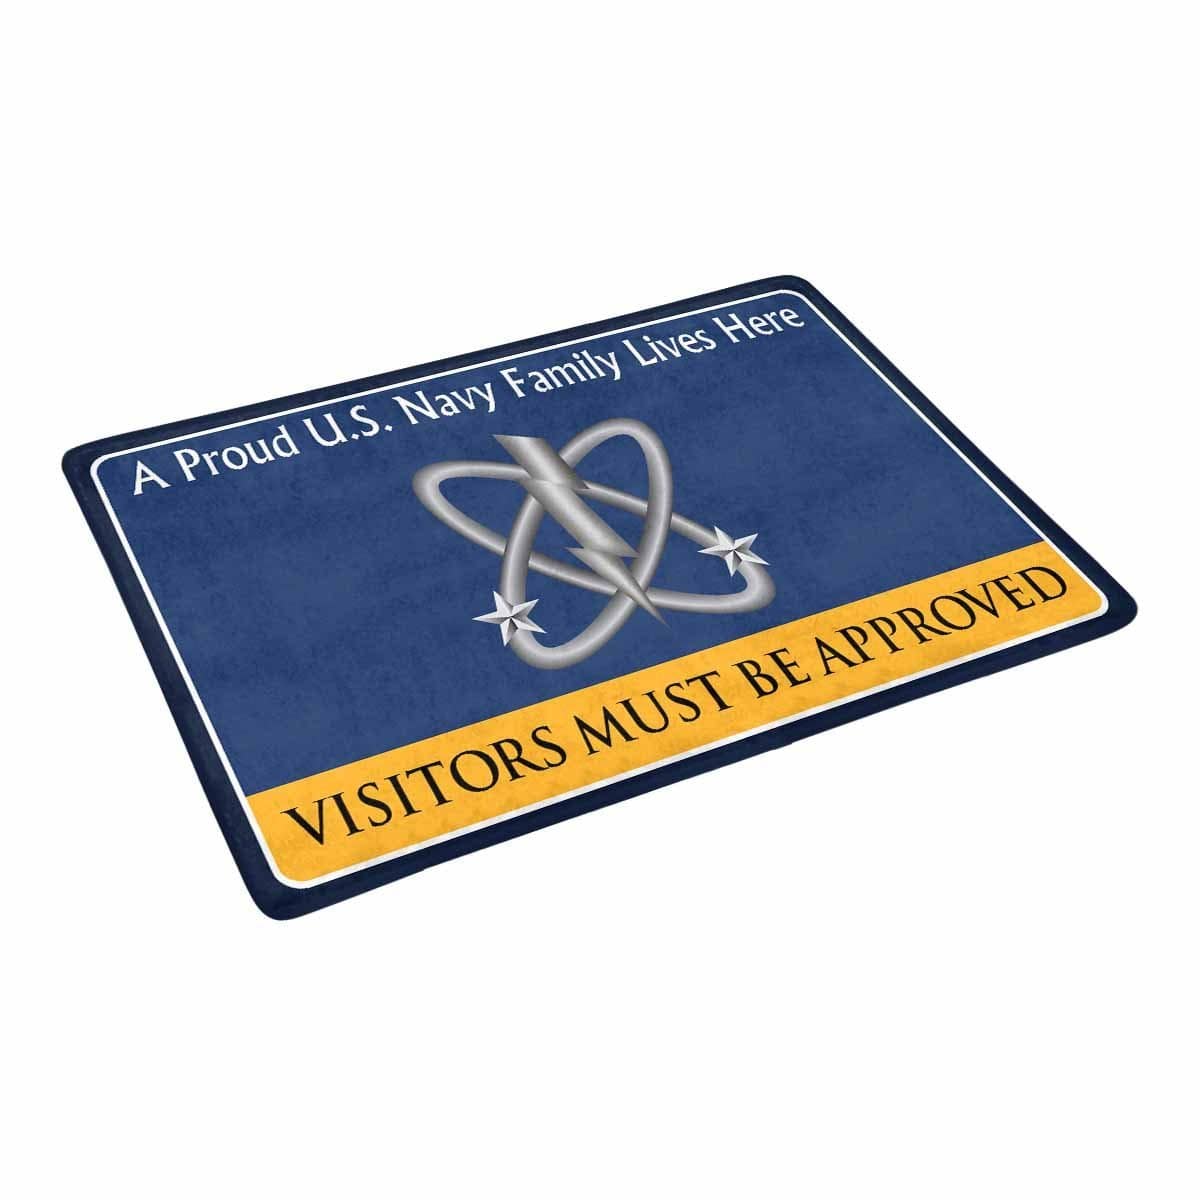 Navy Electronics Warfare Technician Navy EW Family Doormat - Visitors must be approved (23,6 inches x 15,7 inches)-Doormat-Navy-Rate-Veterans Nation